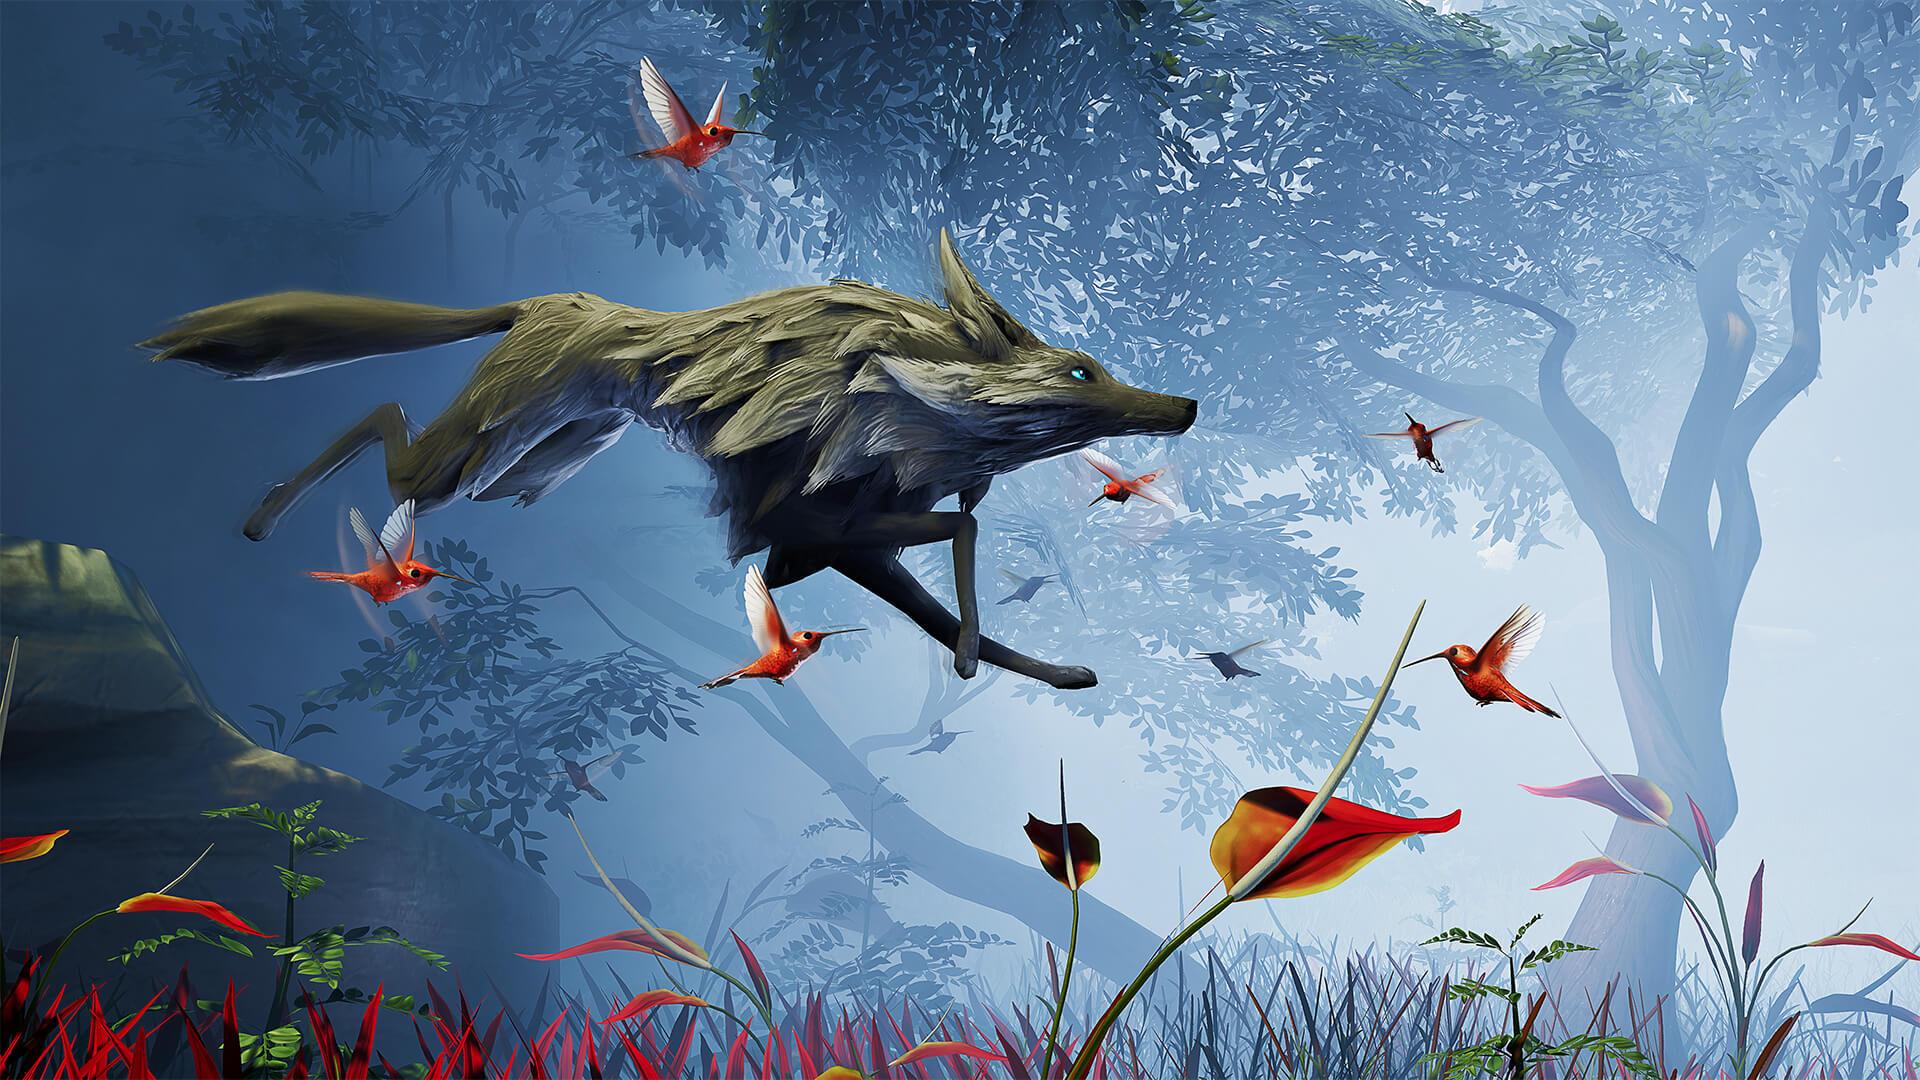 Lost Ember's exploring animals discover Gamescom's indie award